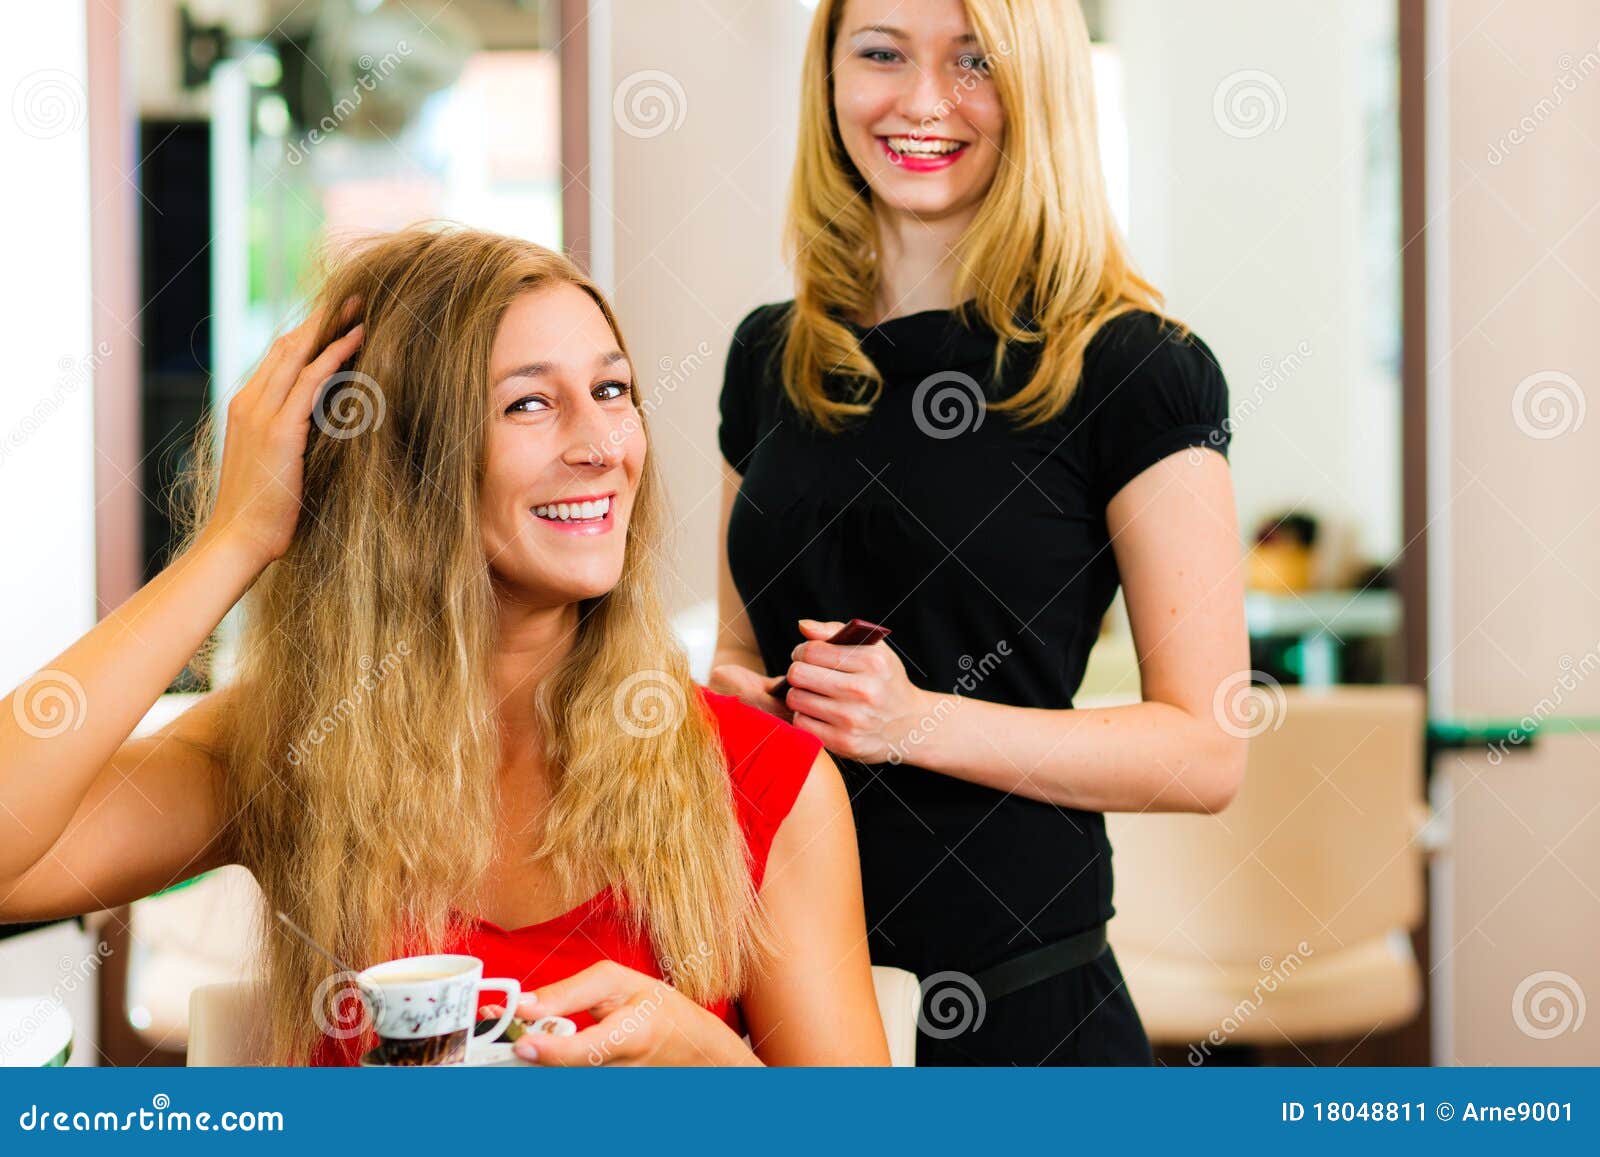 woman at the hairdresser getting advise